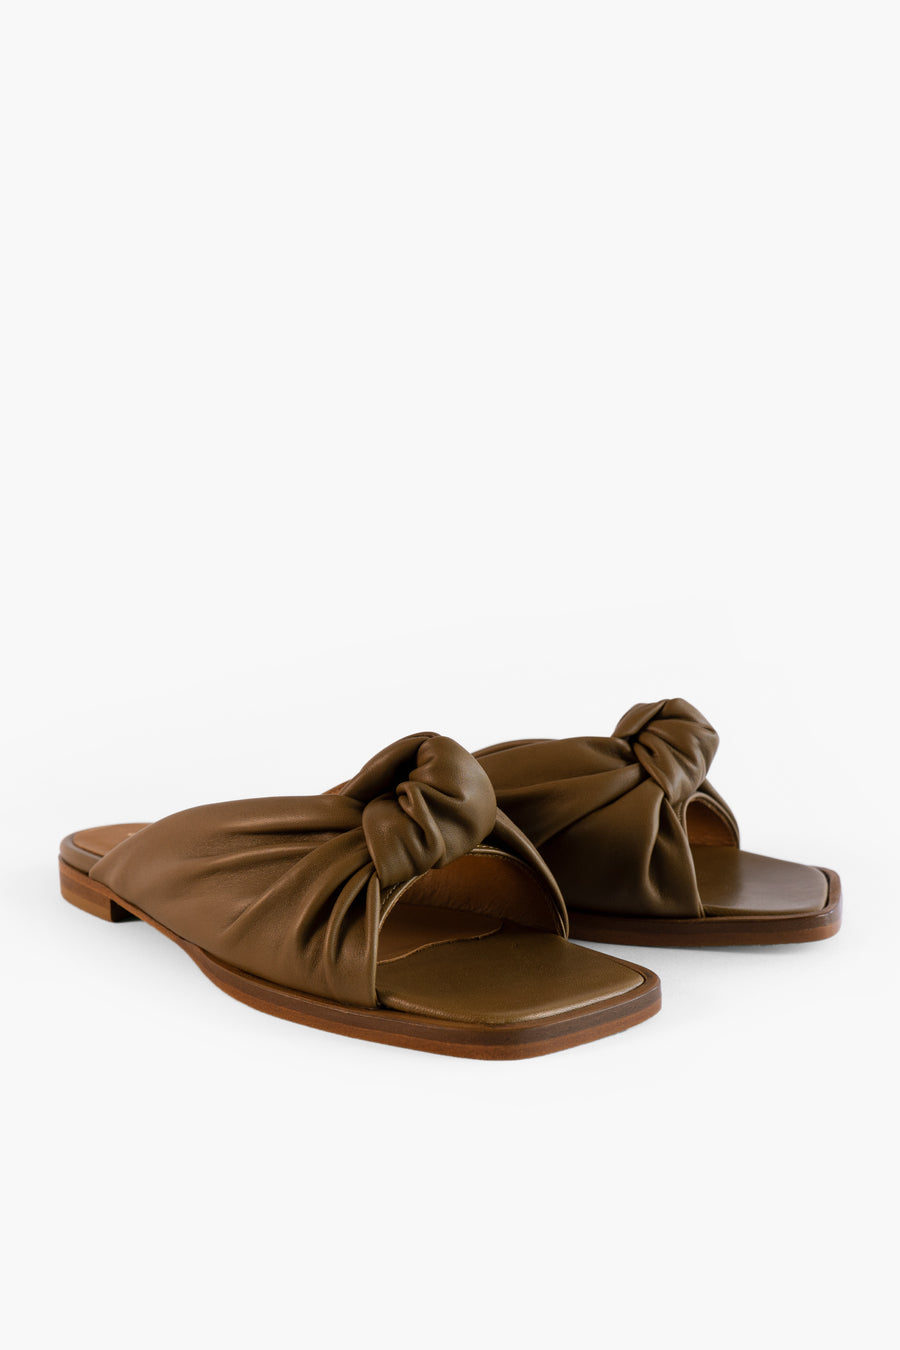 TILLY | Sustainable Sandals Made in Germany